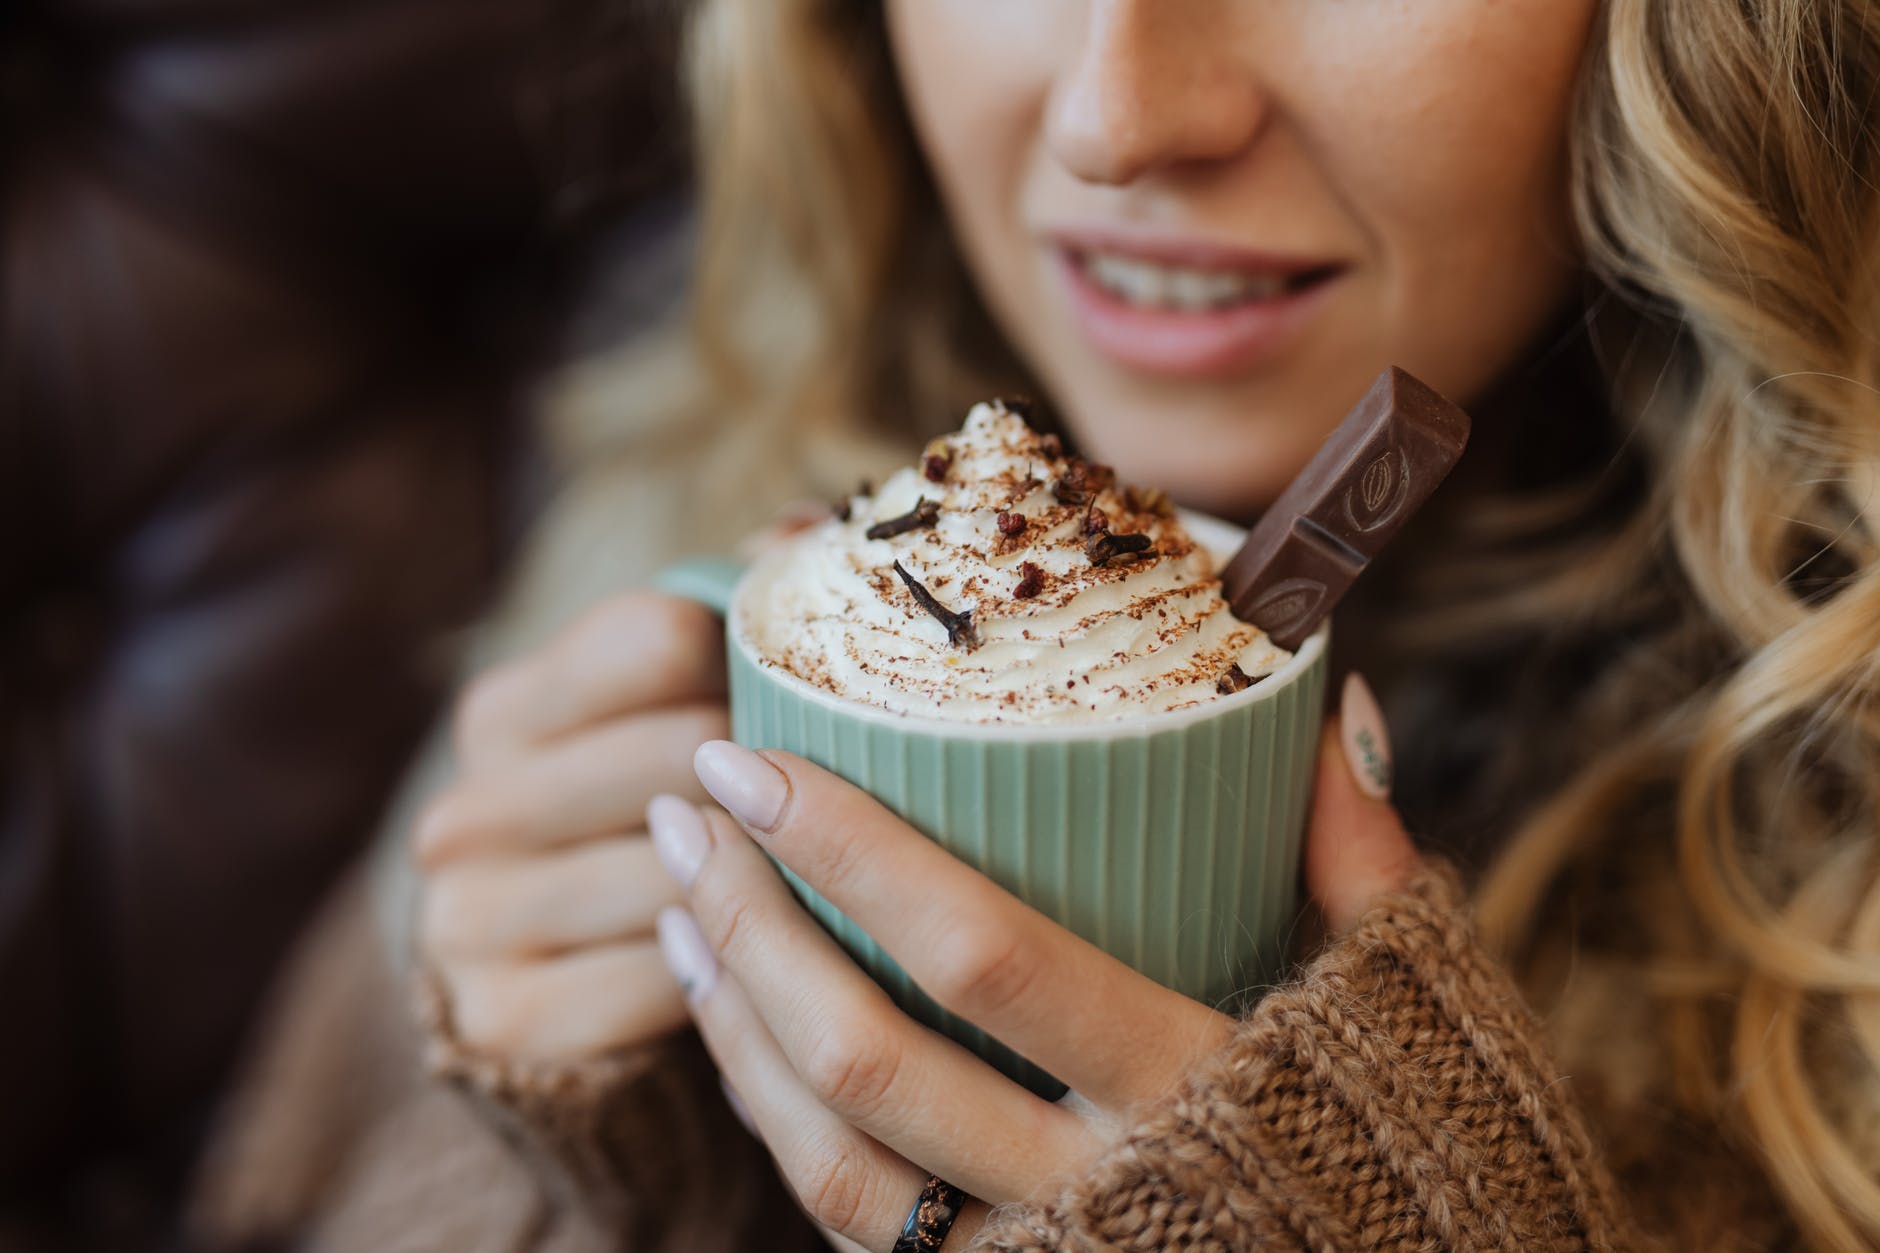 Christina sipped her hot chocolate happily. | Source: Pexels